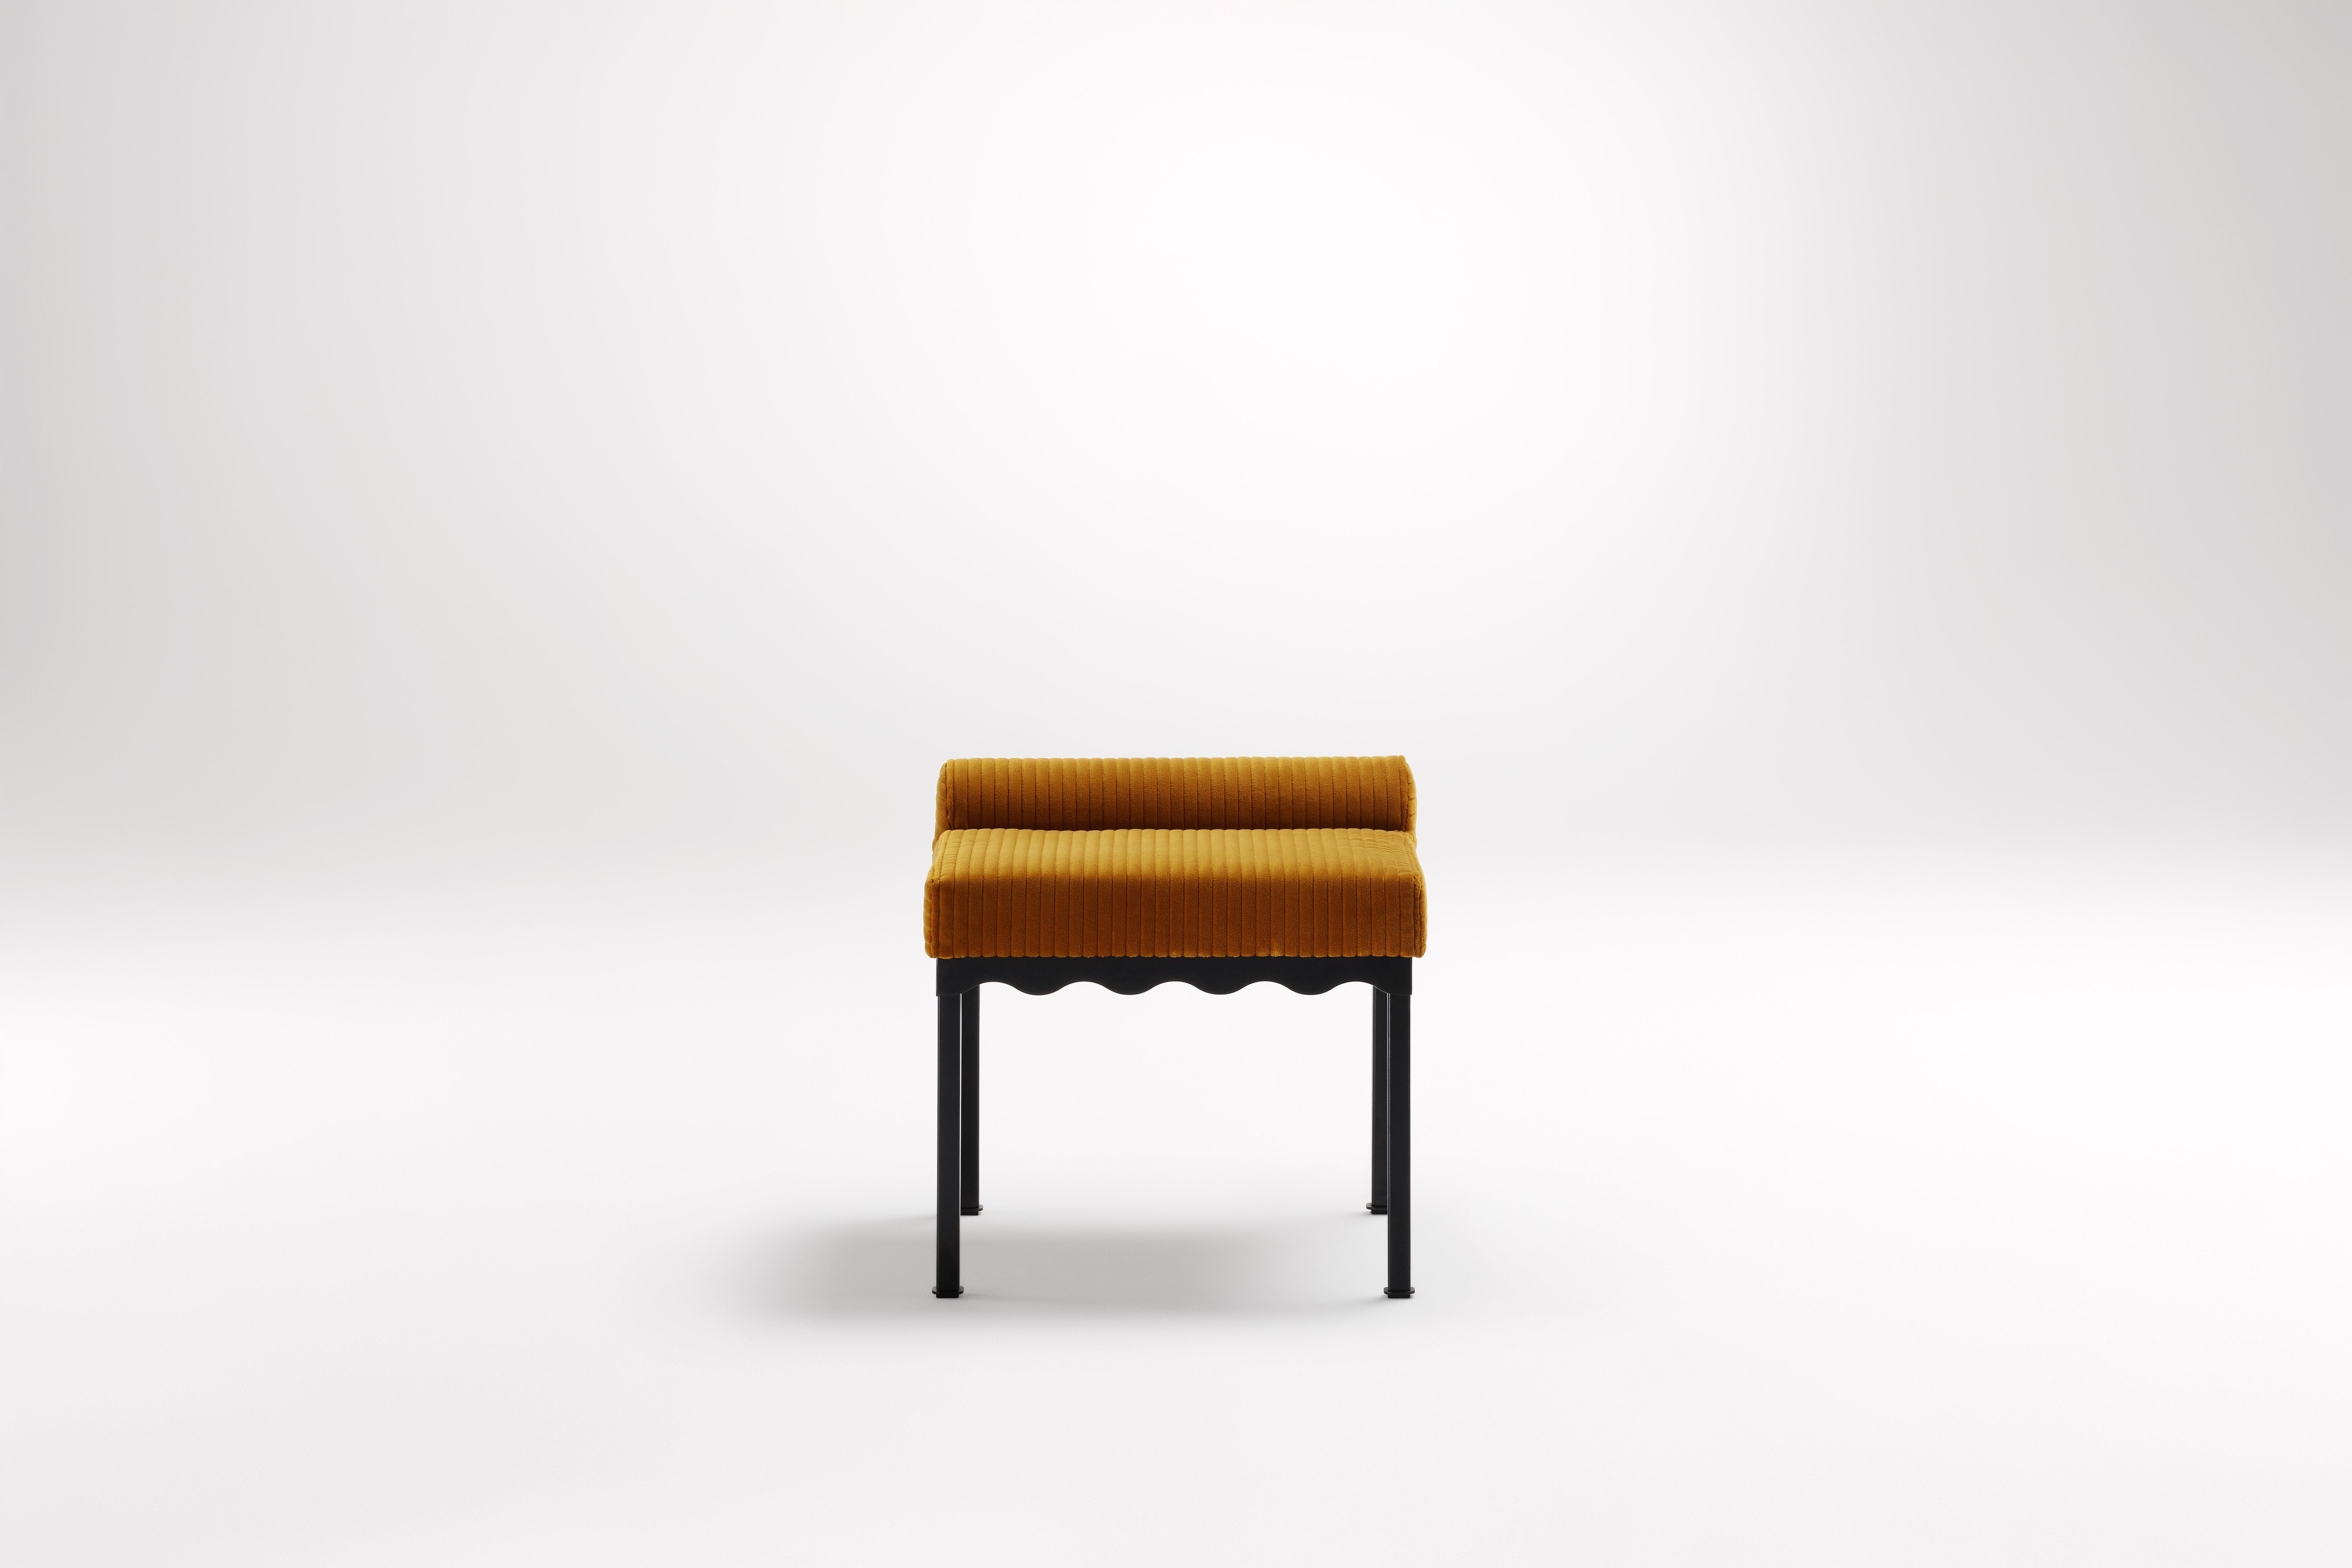 Mikado Bellini 540 Bench by Coco Flip
Dimensions: D 54 x W 54 x H 52.5 cm
Materials: Timber / Upholstered tops, Powder-coated steel frame. 
Weight: 12 kg
Frame Finishes: Textura Black.

Coco Flip is a Melbourne based furniture and lighting design